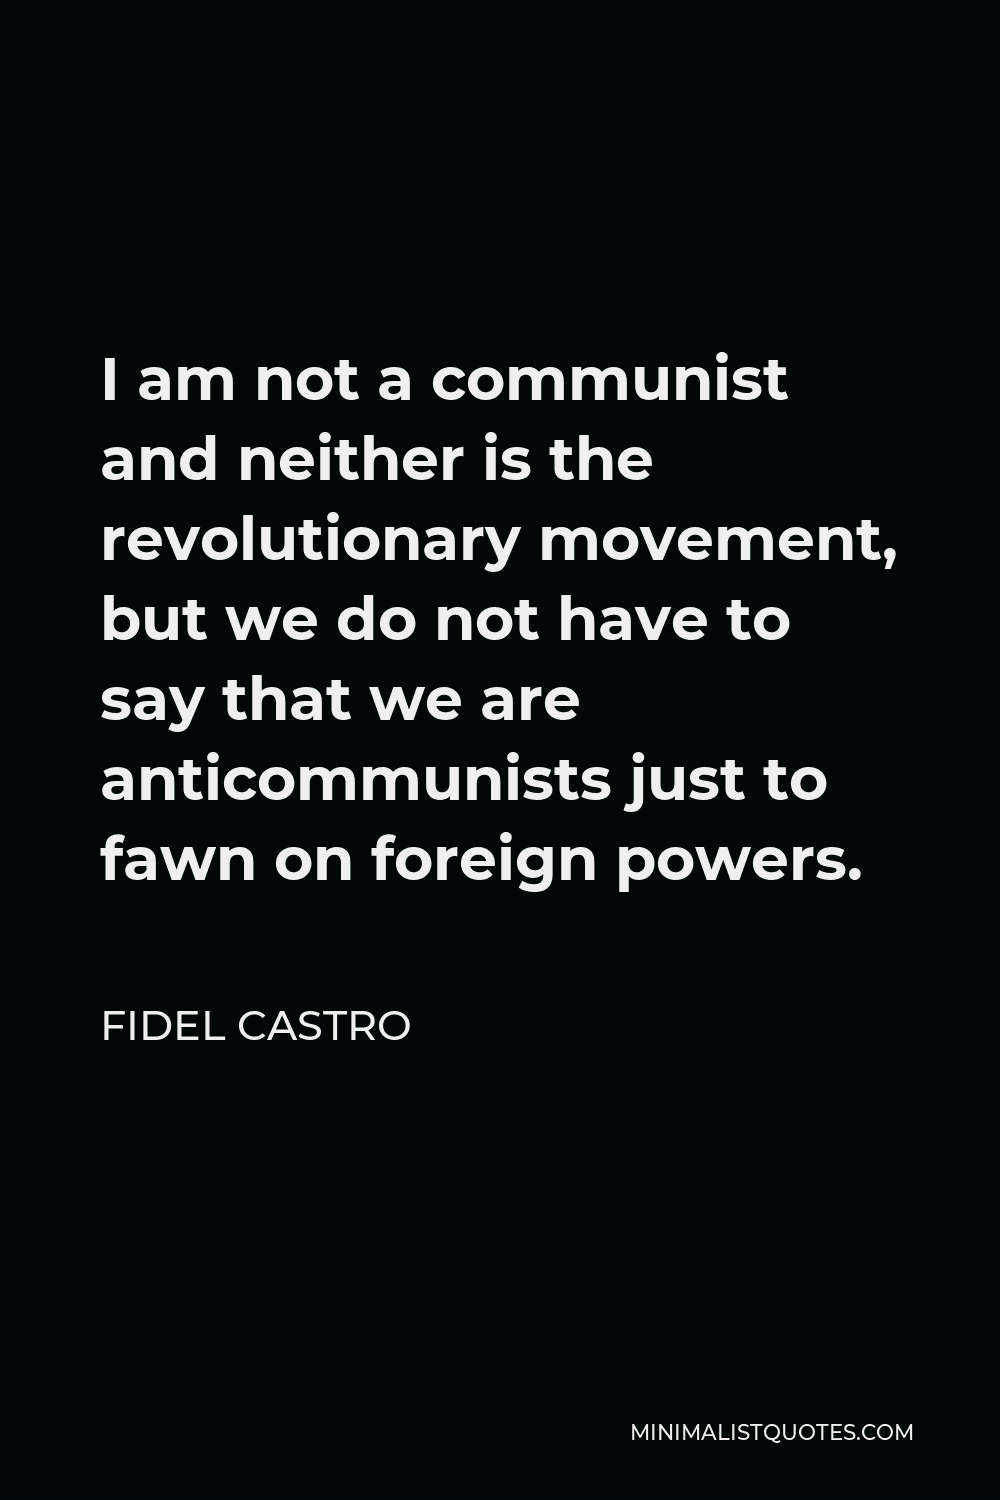 Fidel Castro Quote - I am not a communist and neither is the revolutionary movement, but we do not have to say that we are anticommunists just to fawn on foreign powers.